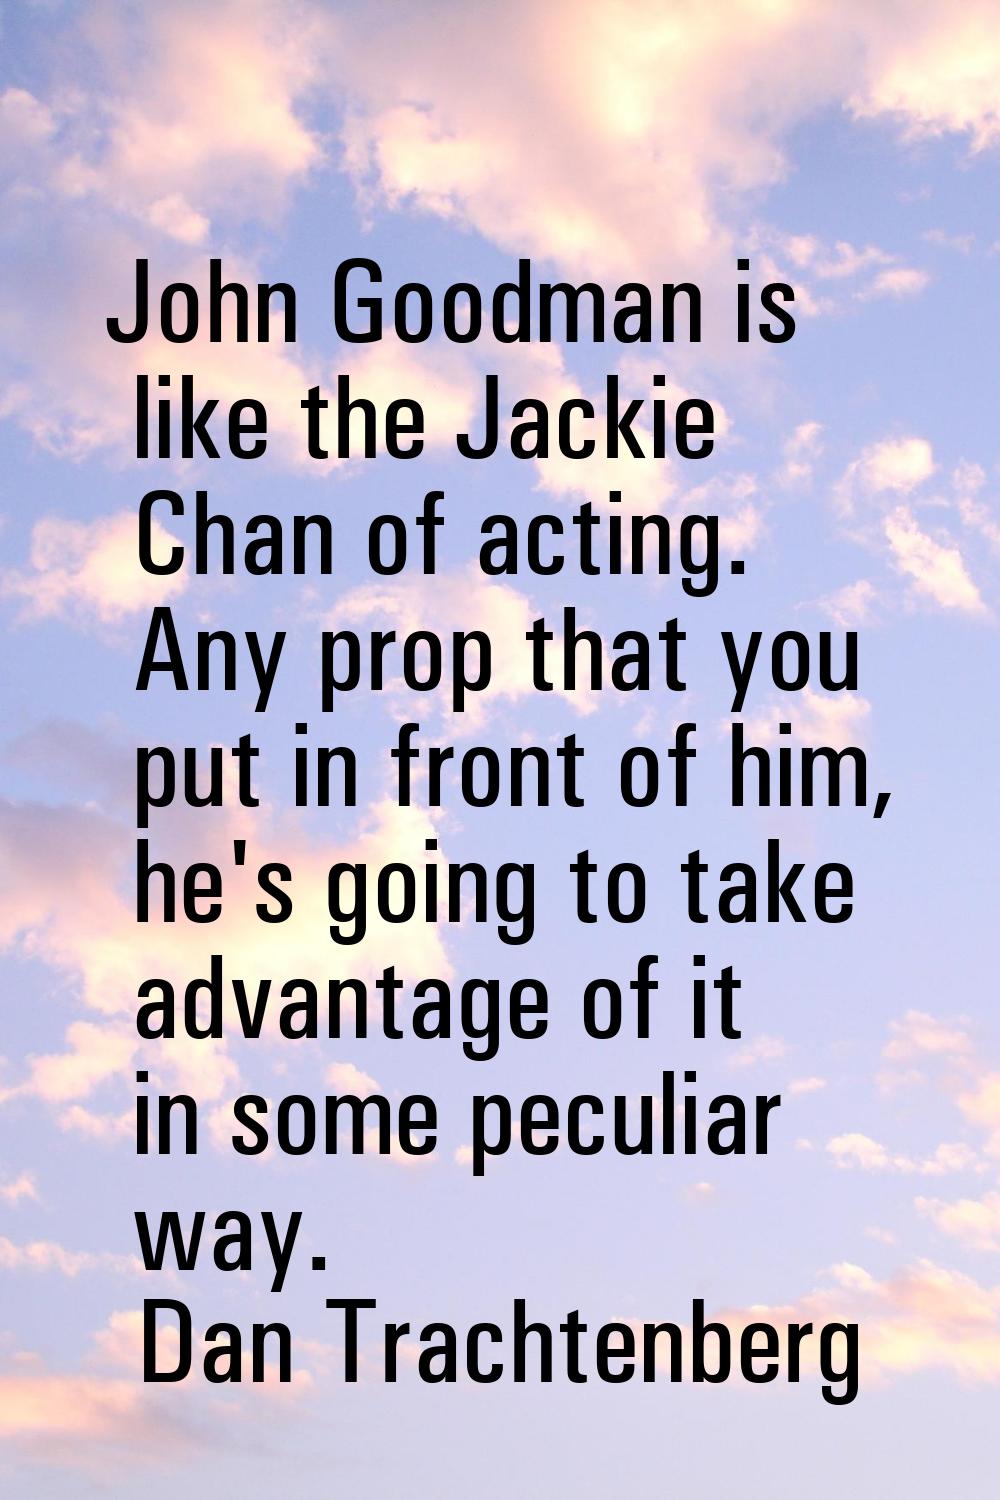 John Goodman is like the Jackie Chan of acting. Any prop that you put in front of him, he's going t